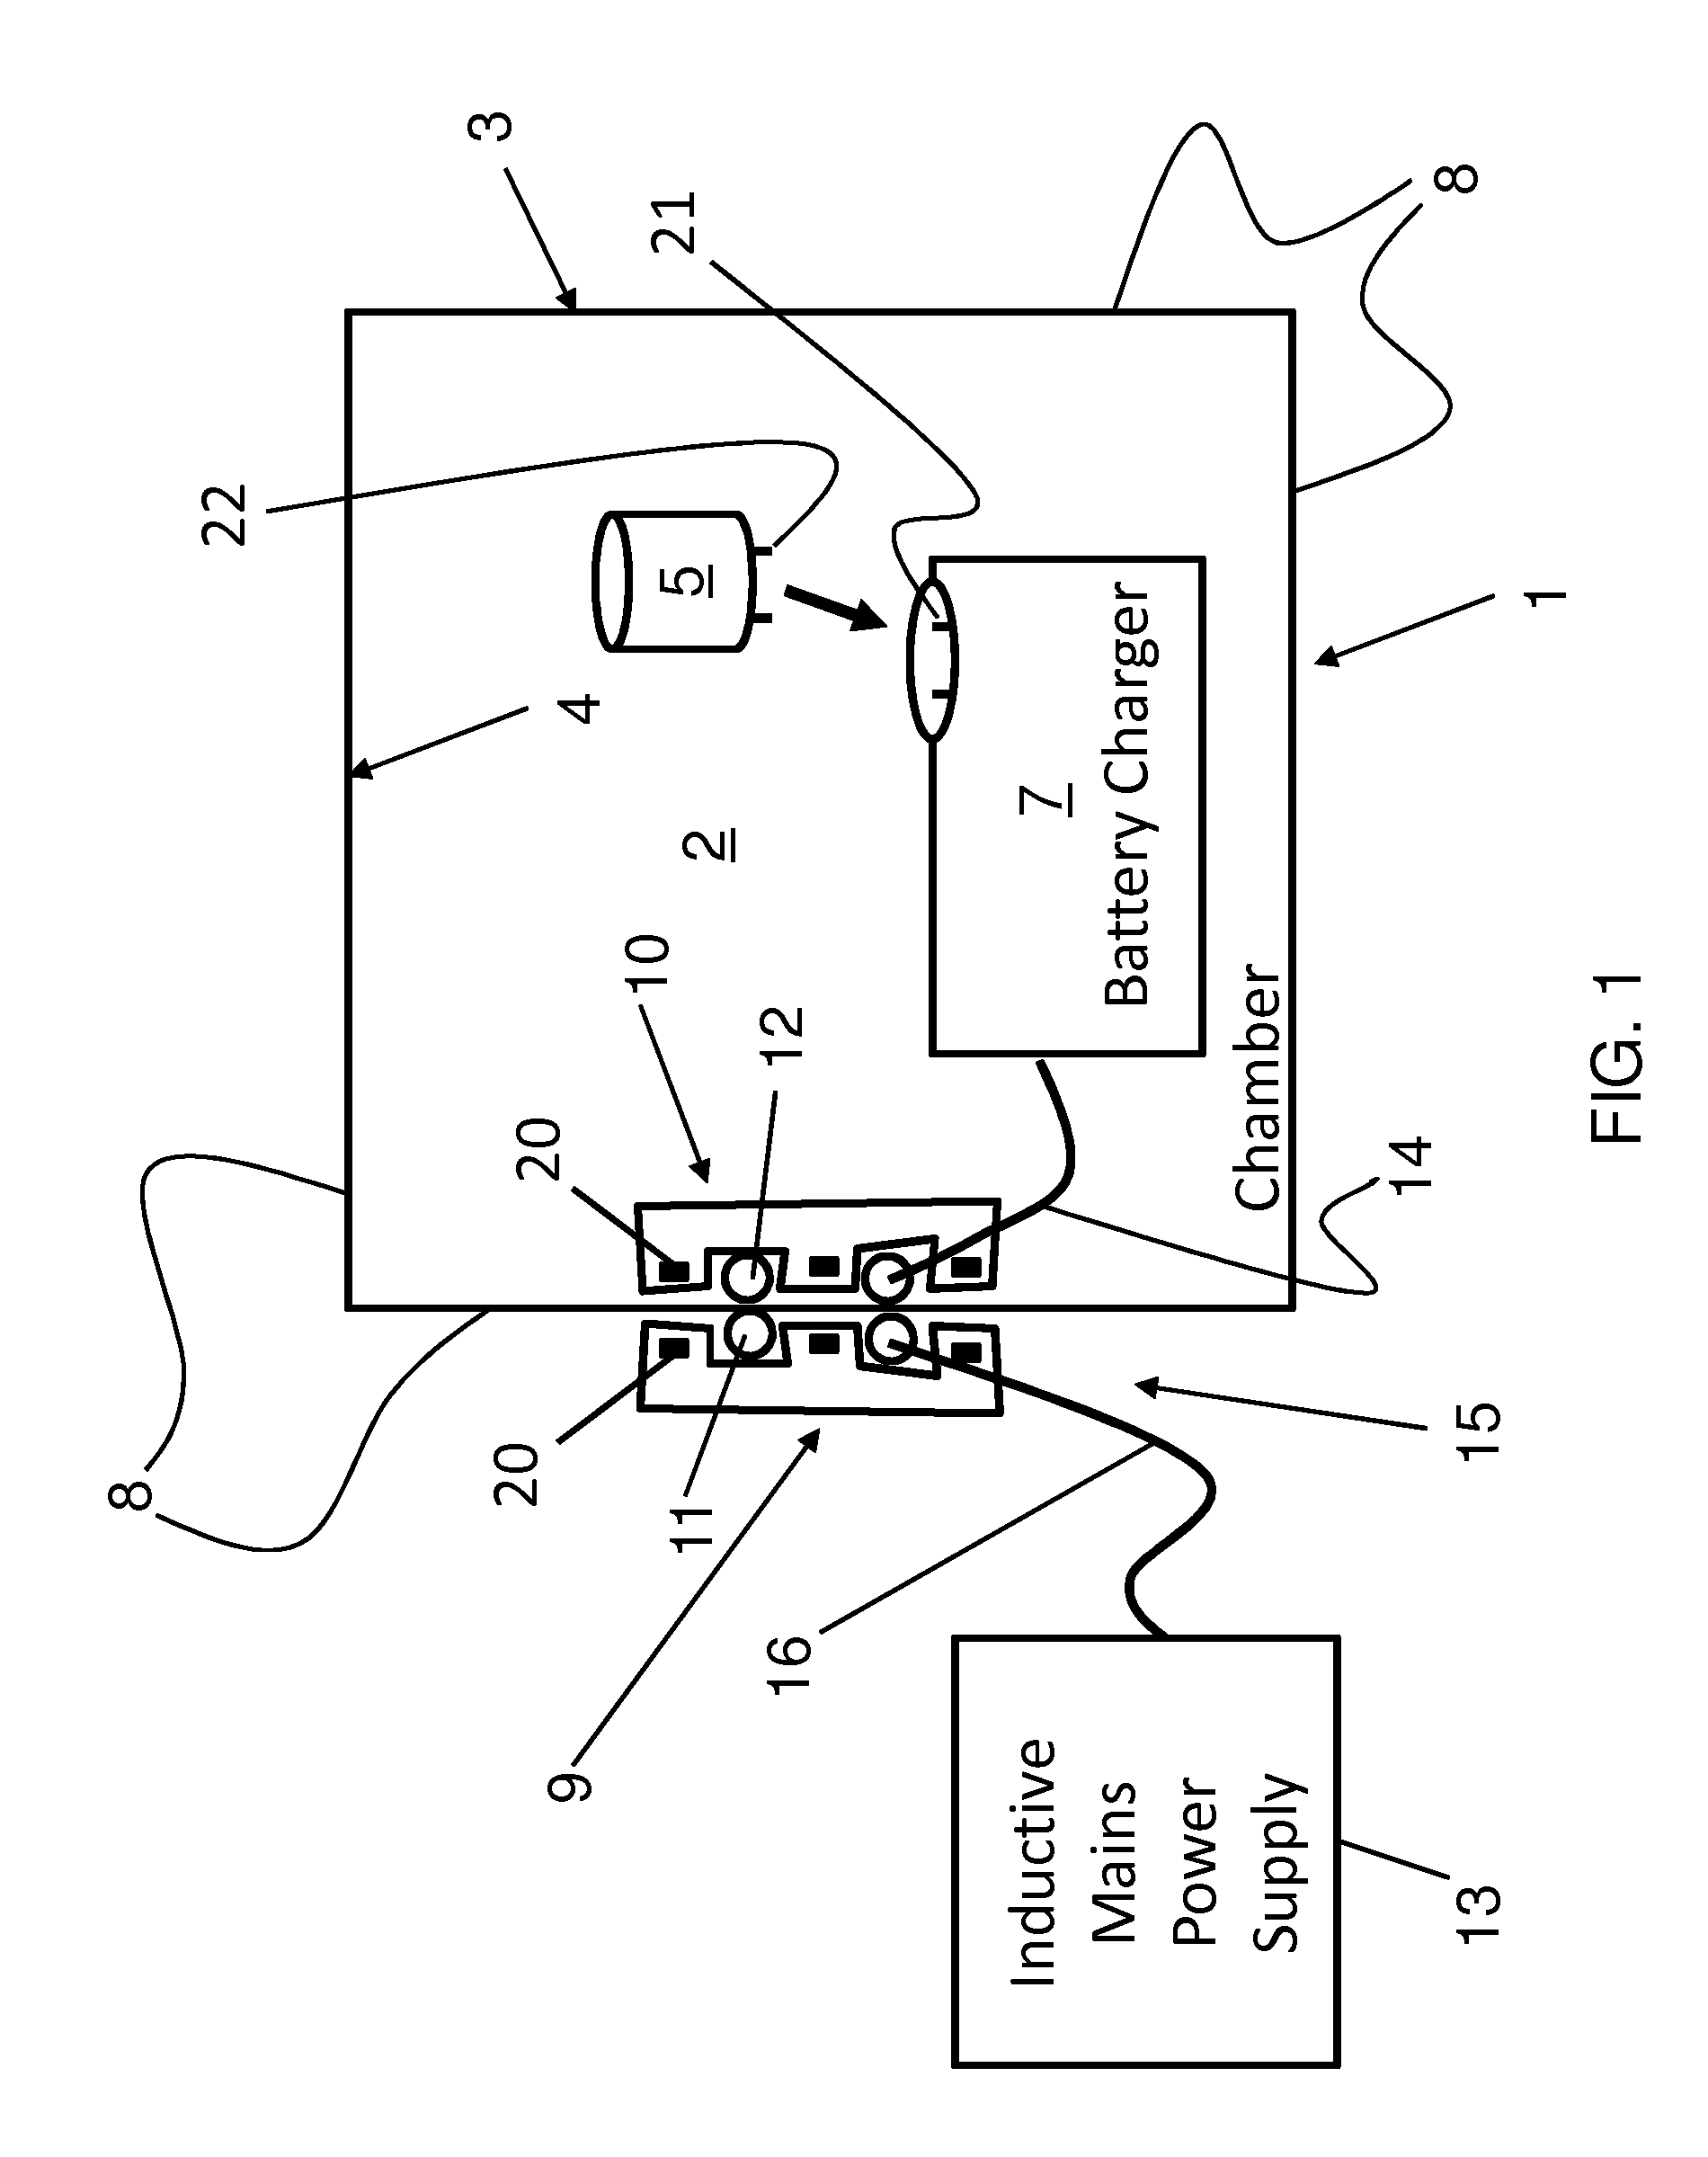 Surgical sterilizer with integrated battery charging device